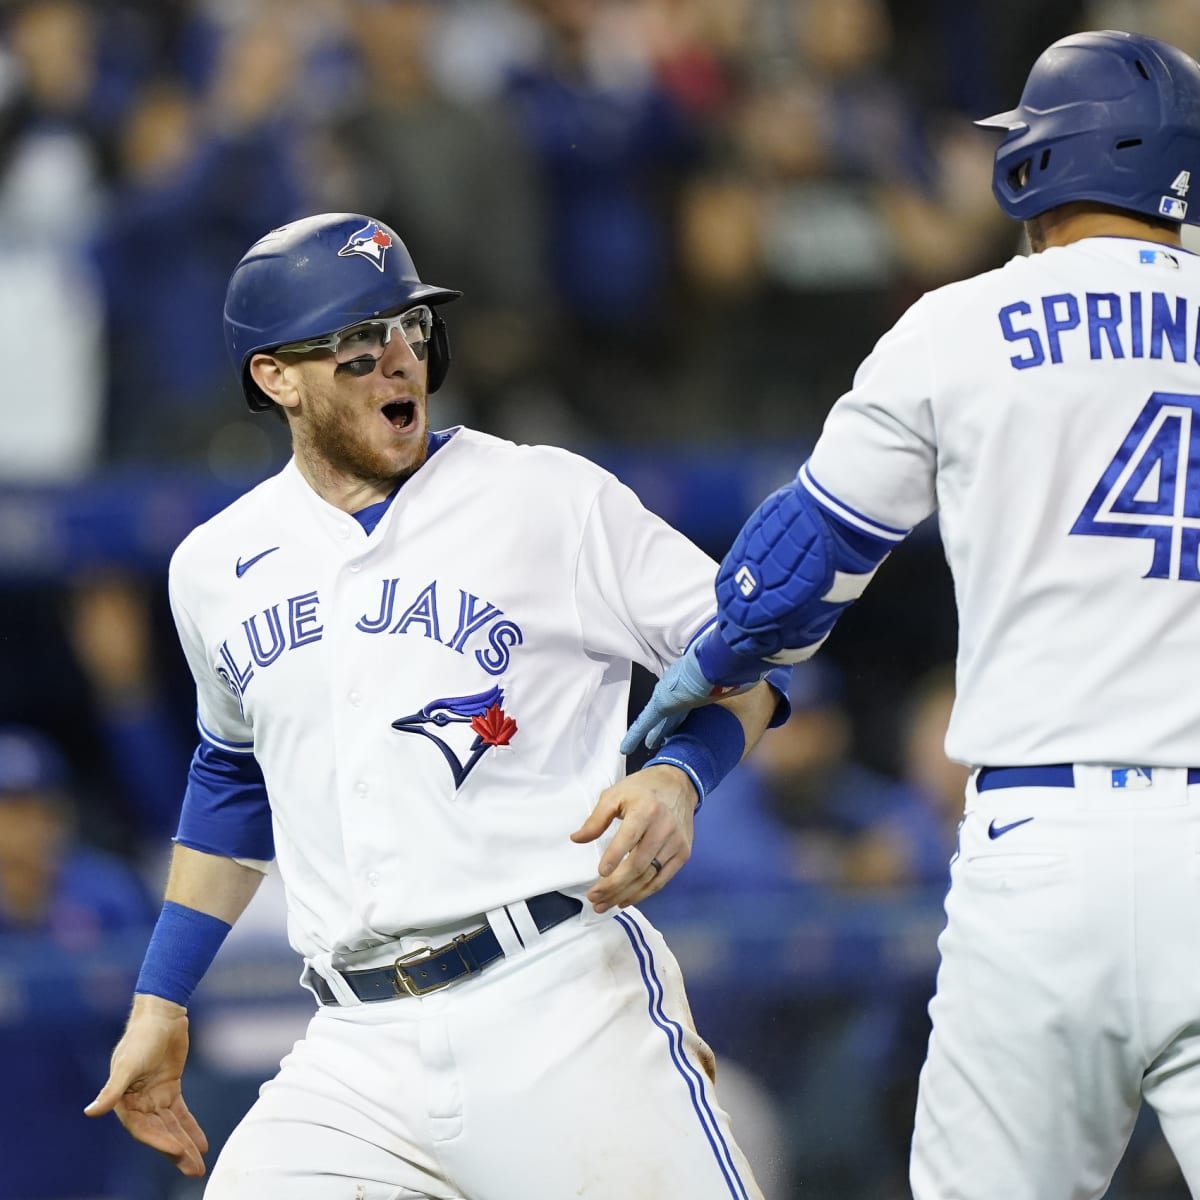 Danny Jansen homers and Kevin Gausman fans 7 as Blue Jays beat Nationals  6-3 - Washington Times